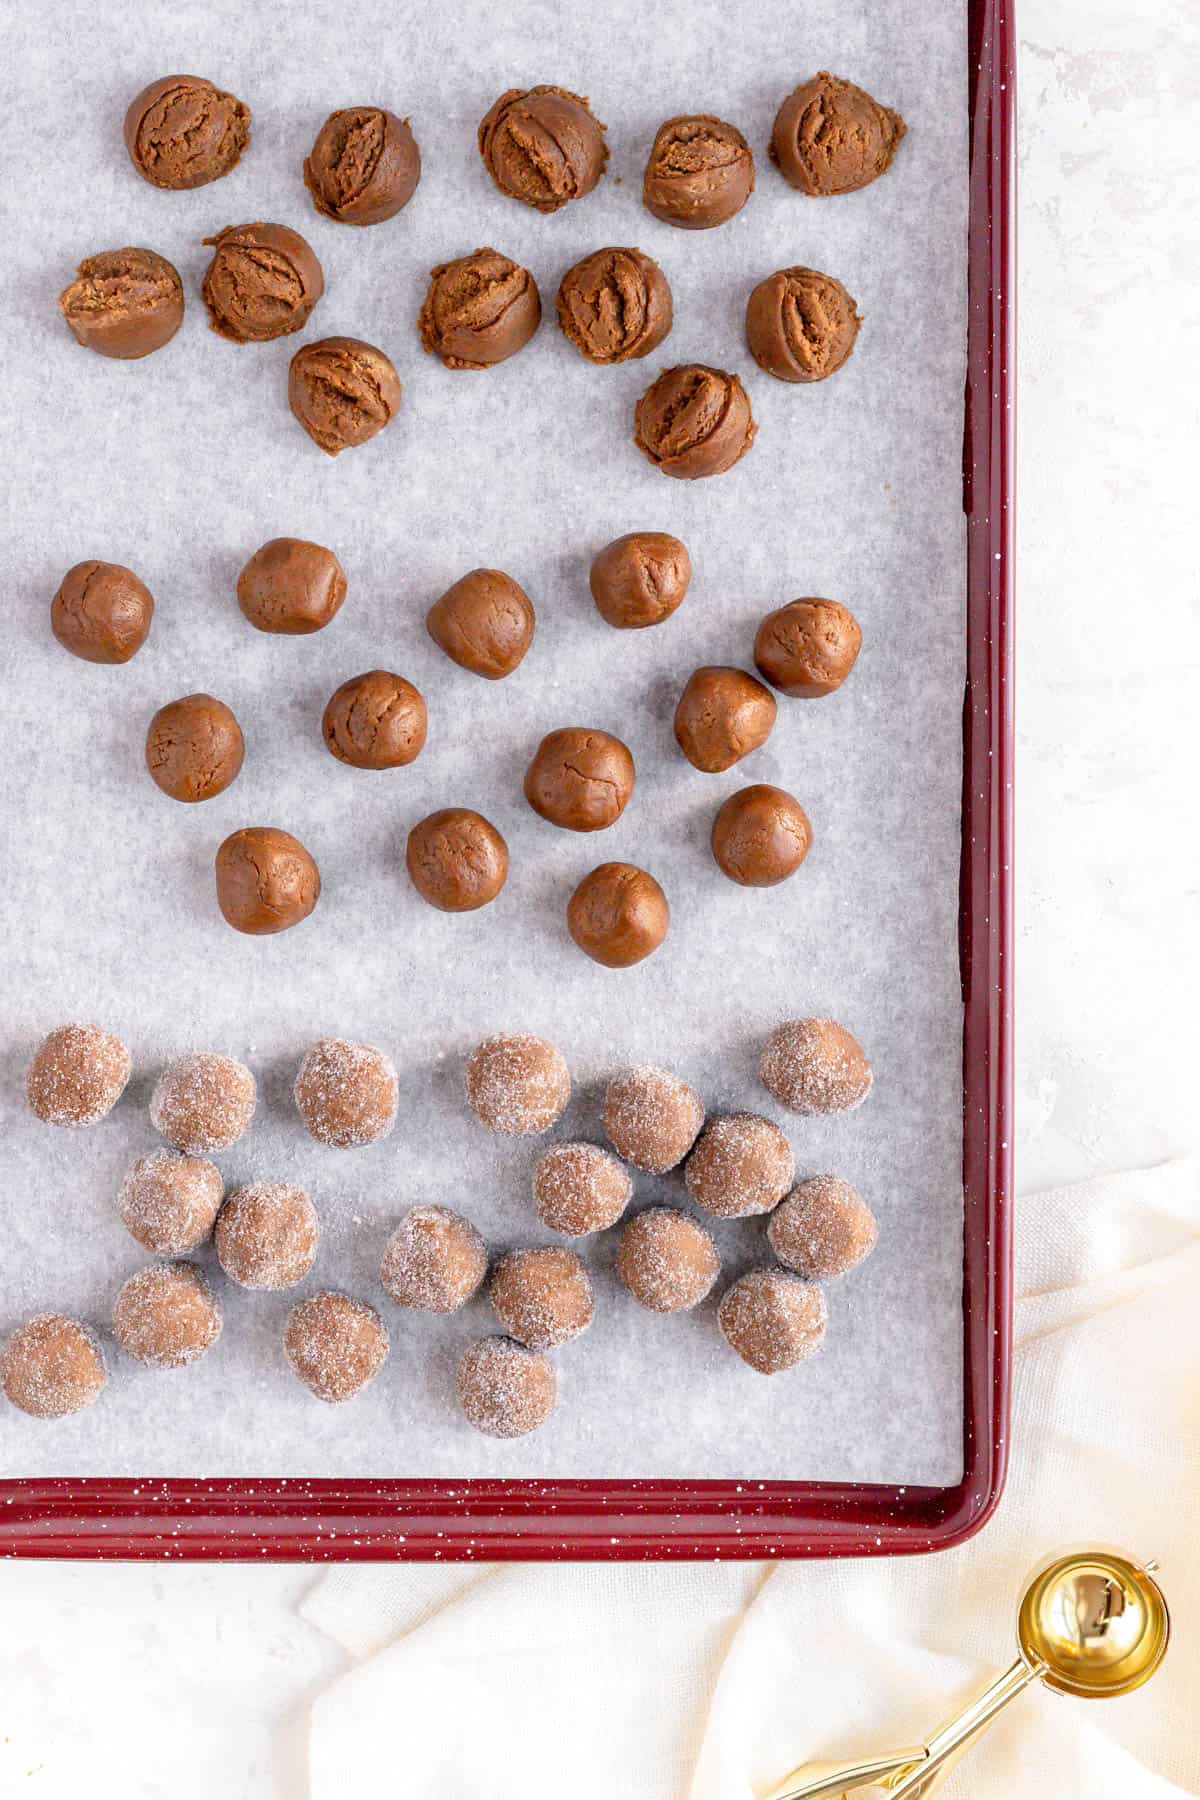 scooped, rolled, and sugar-coated ginger cookie dough balls on a red baking sheet